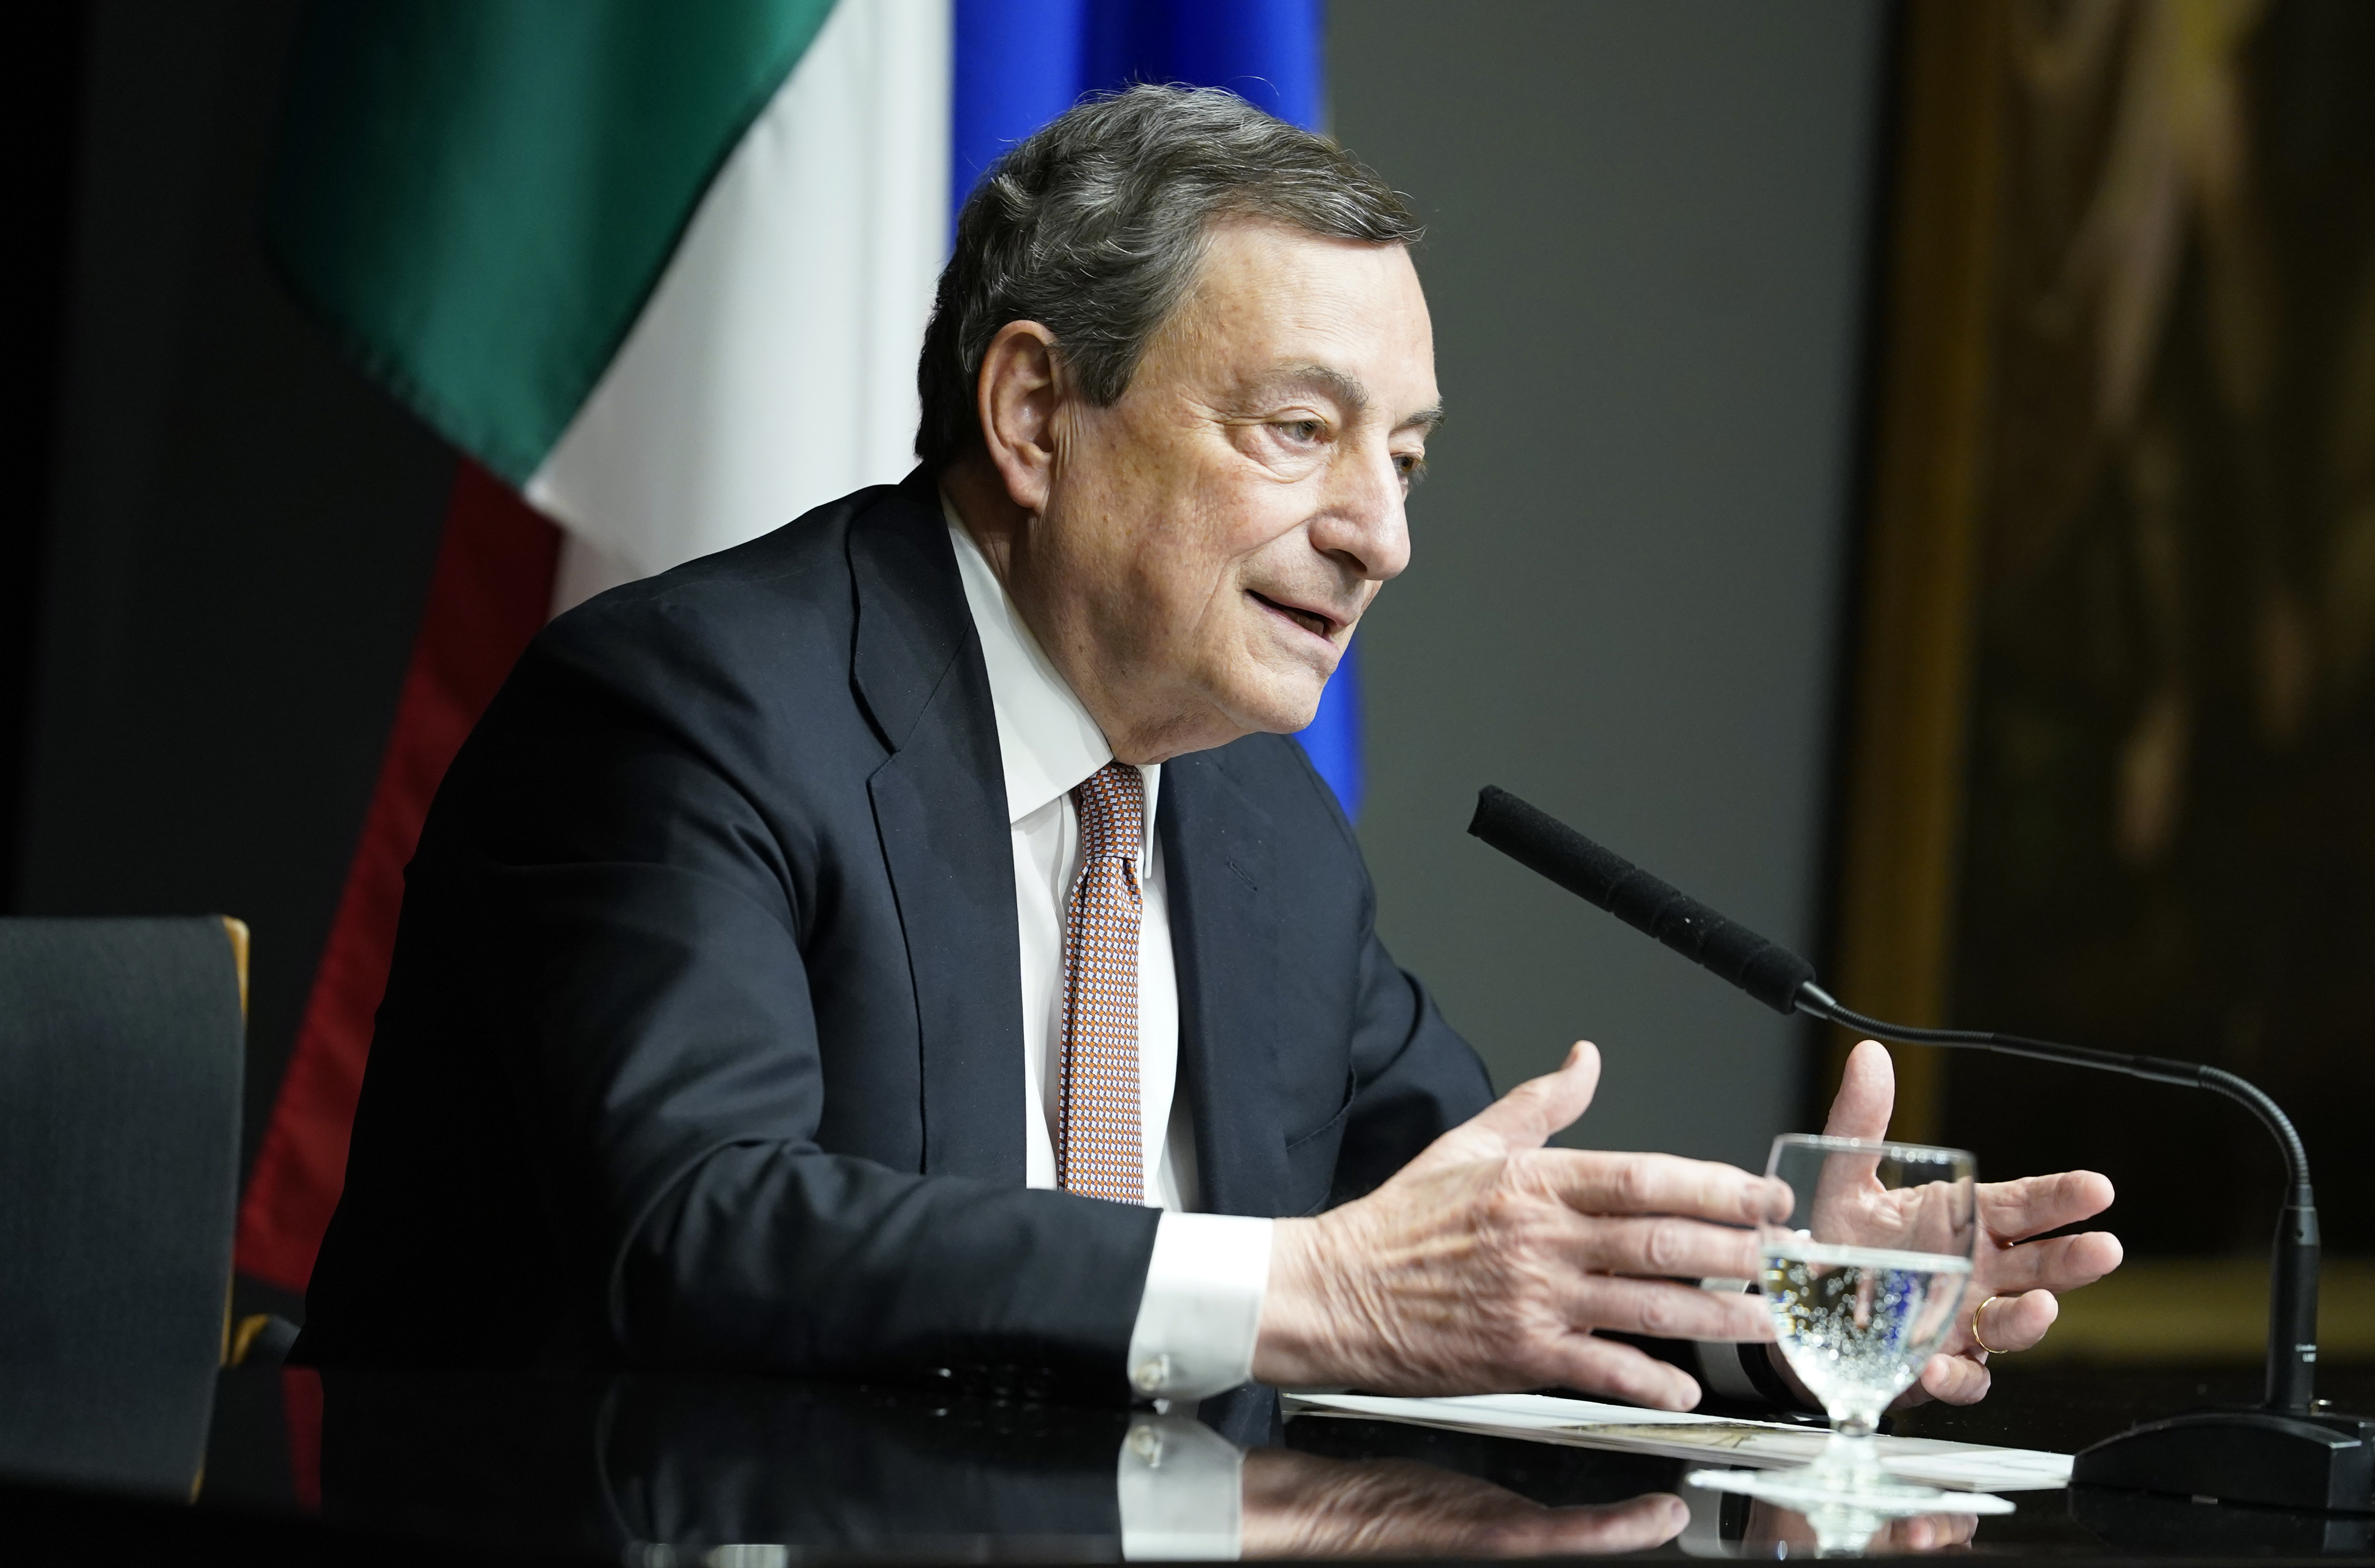 Italy's Prime Minister Mario Draghi speaks during a press conference at the Italian Embassy, Wednesday, May 11, 2022, in Washington. (AP Photo/Mariam Zuhaib)